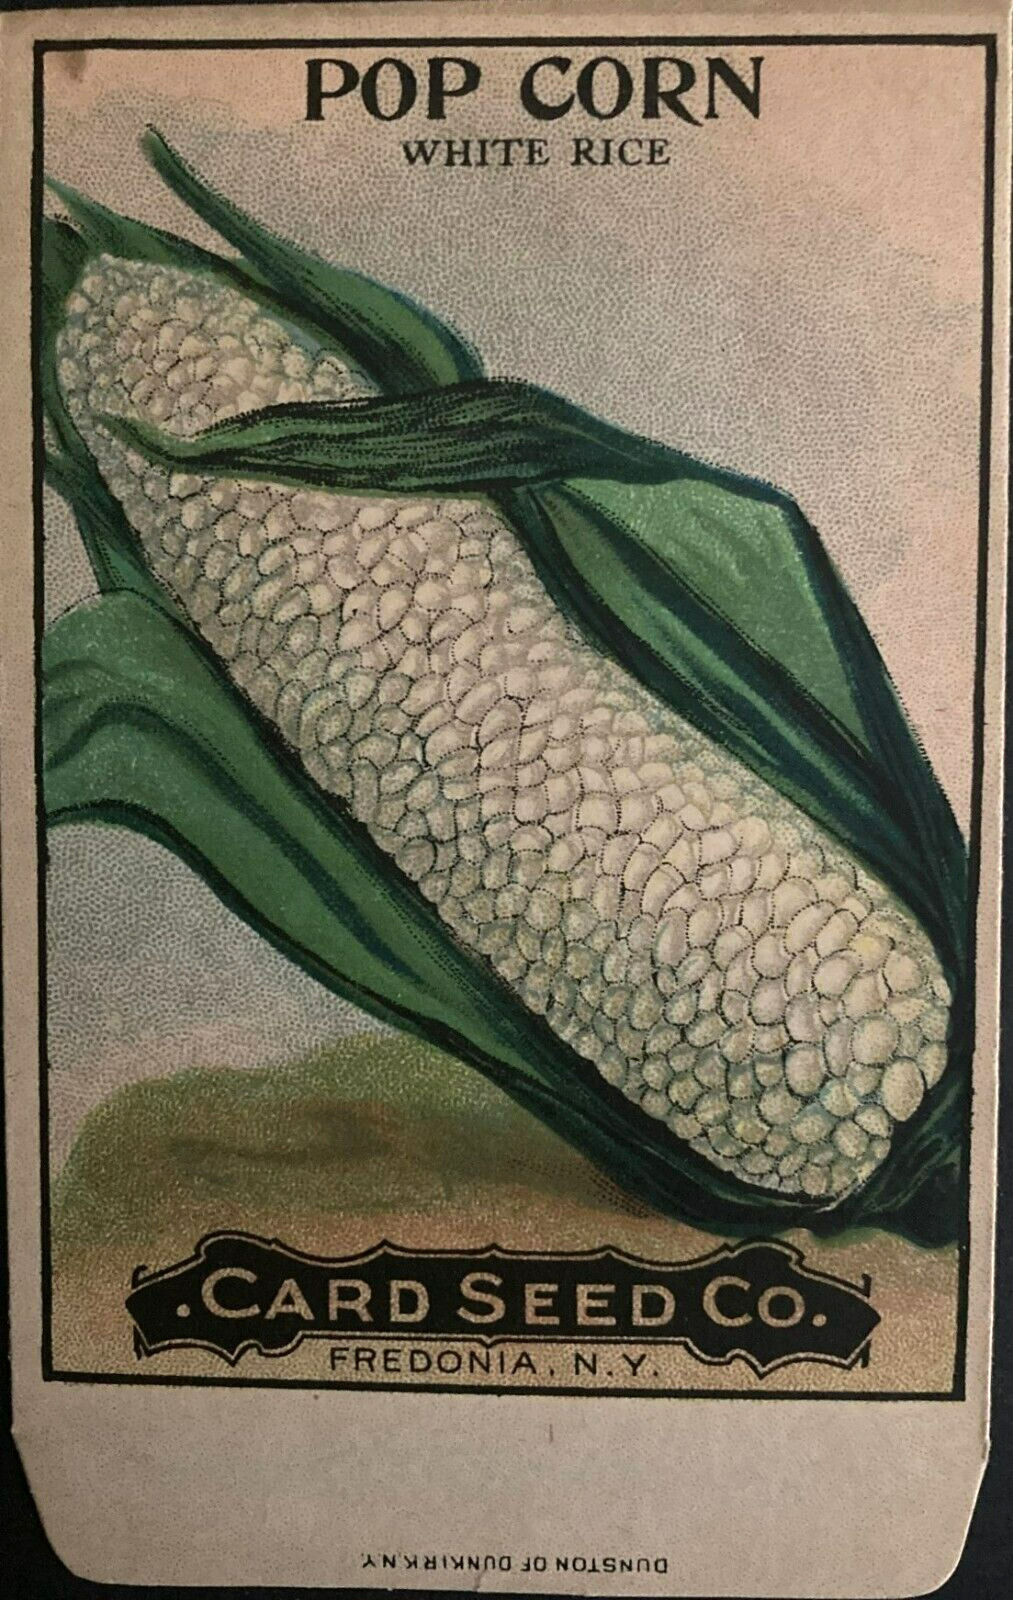 1908 Pop Corn White Rice Seed Packet - Card Seed Co. Fredonia, N.Y. \